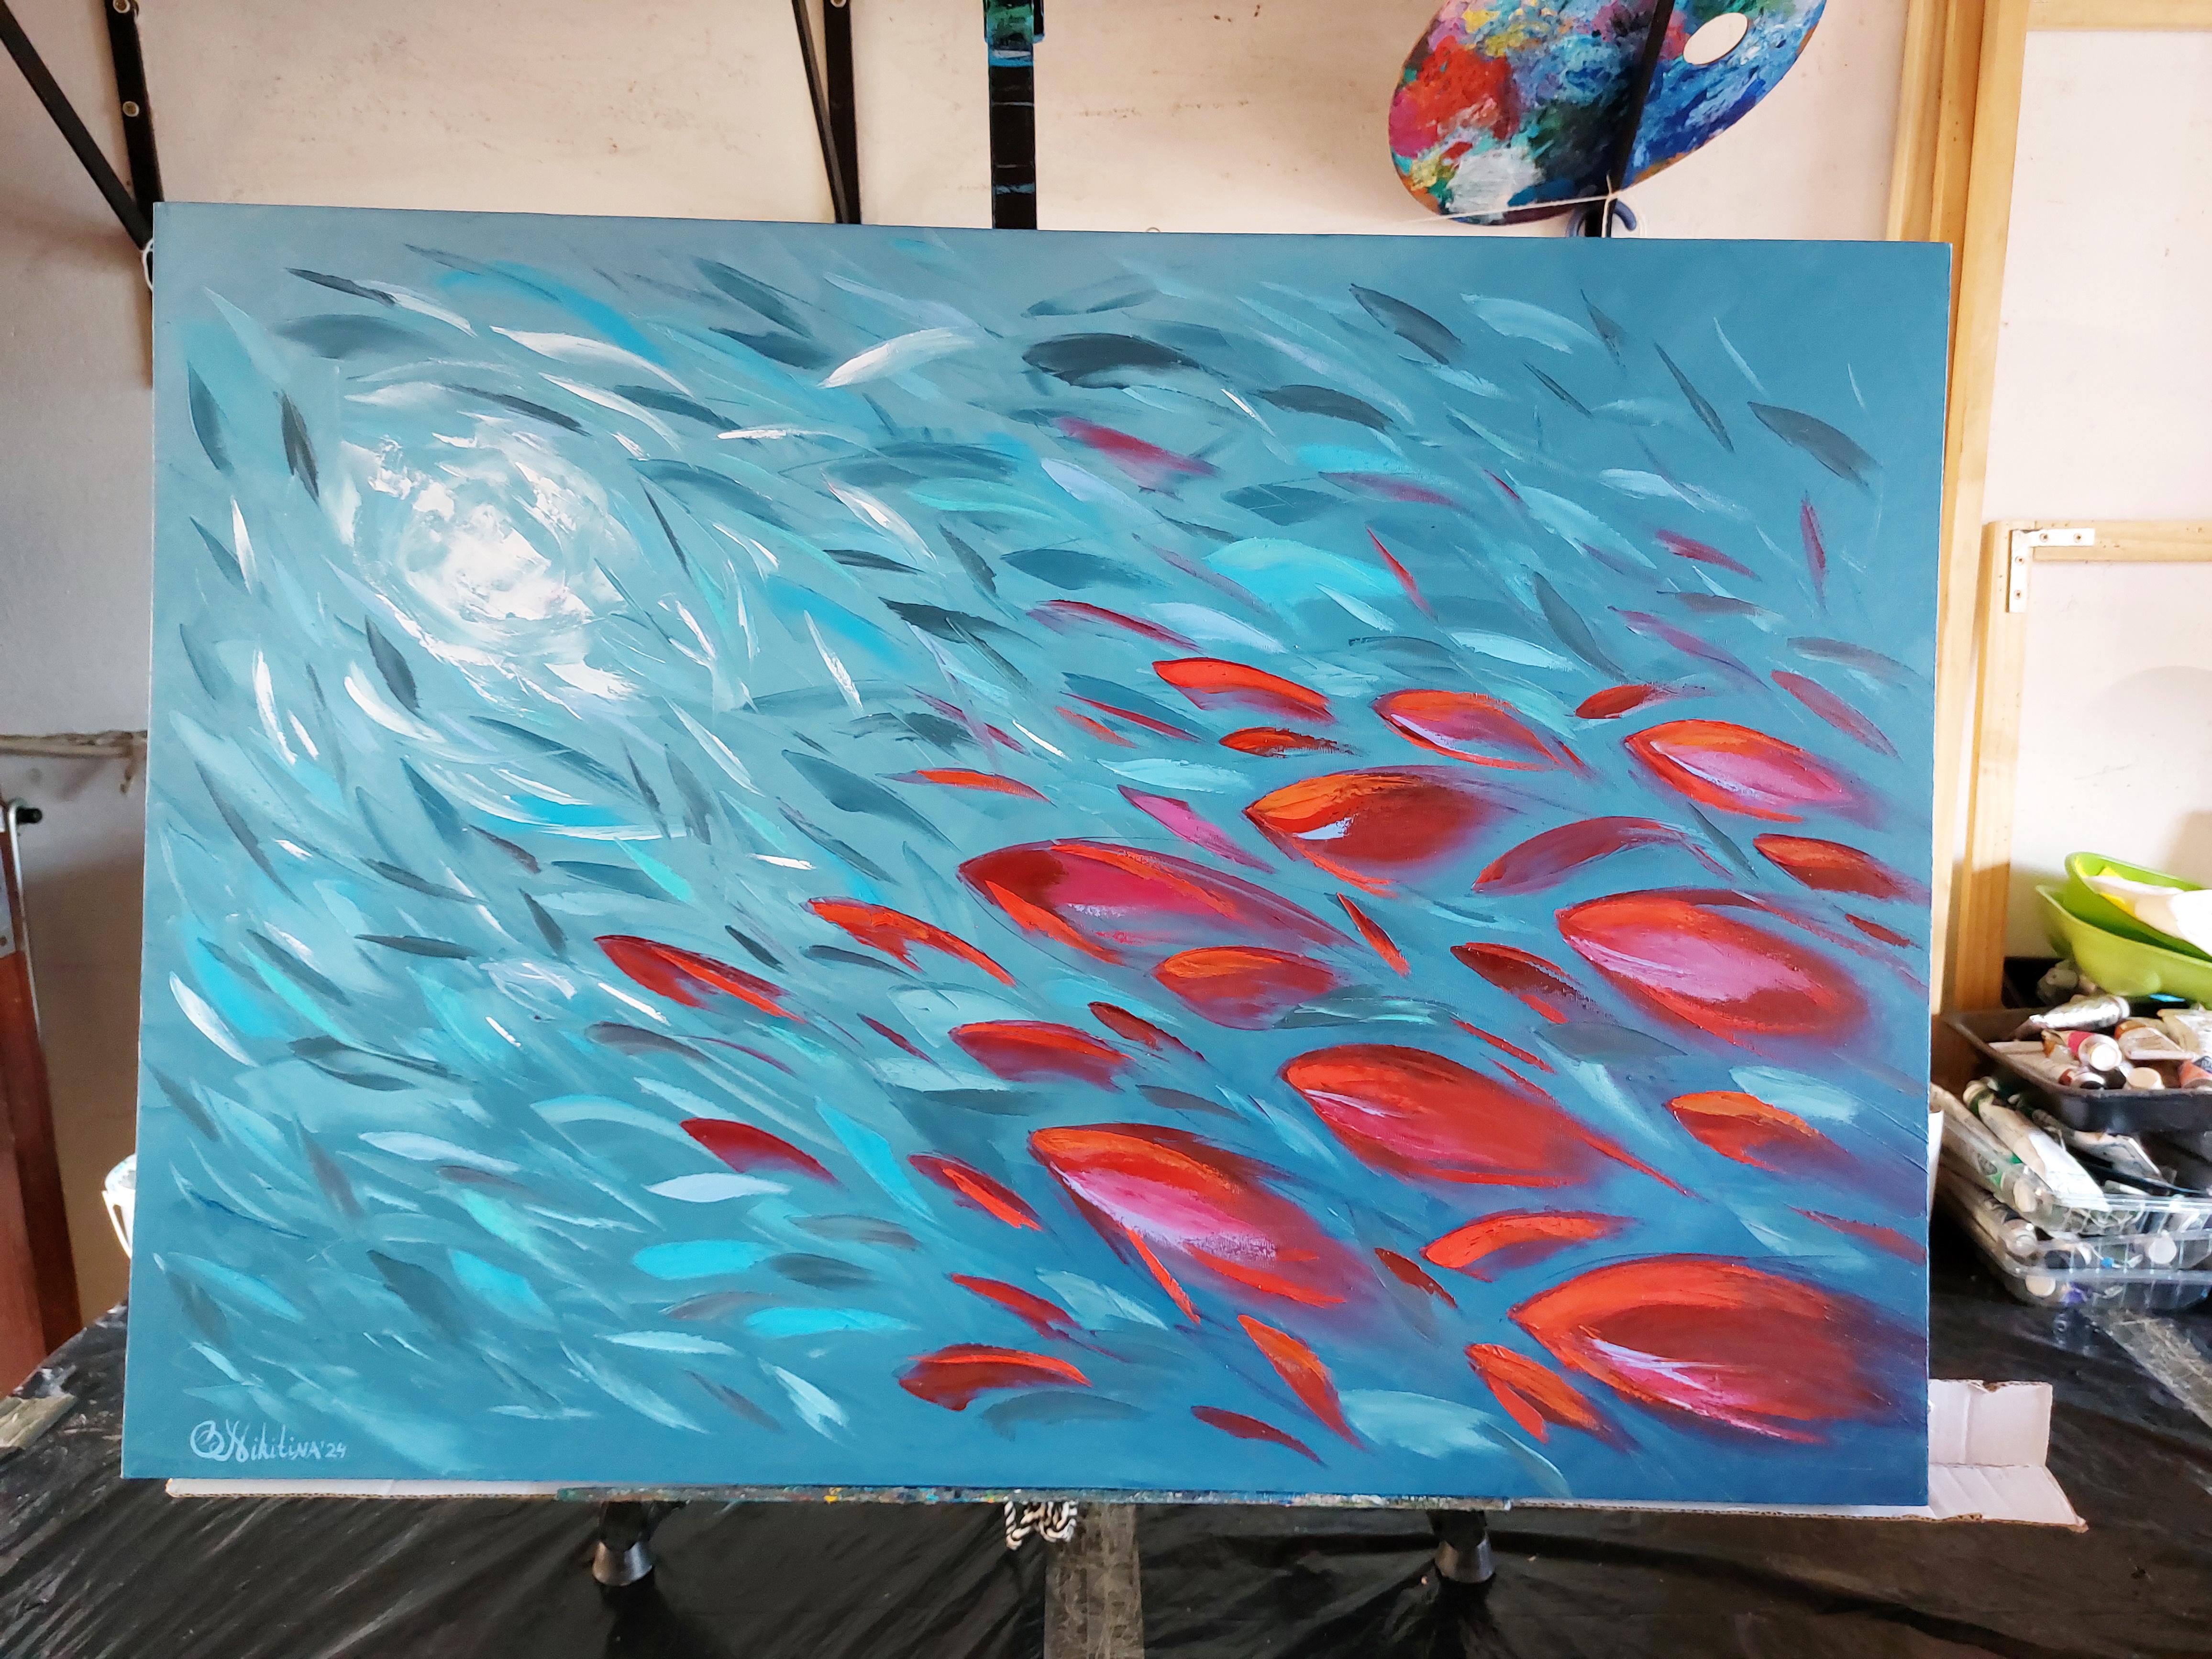 Red Fish Painting Ocean Art Impasto Painting Palette Knife Art by Olga Nikitina
Title: Red Fish Symphony
Size: 85x60x2 cm
Materials: oil, stretched canvas, palette knife
Shipping: gallery standards packaging, express shipping with tracking